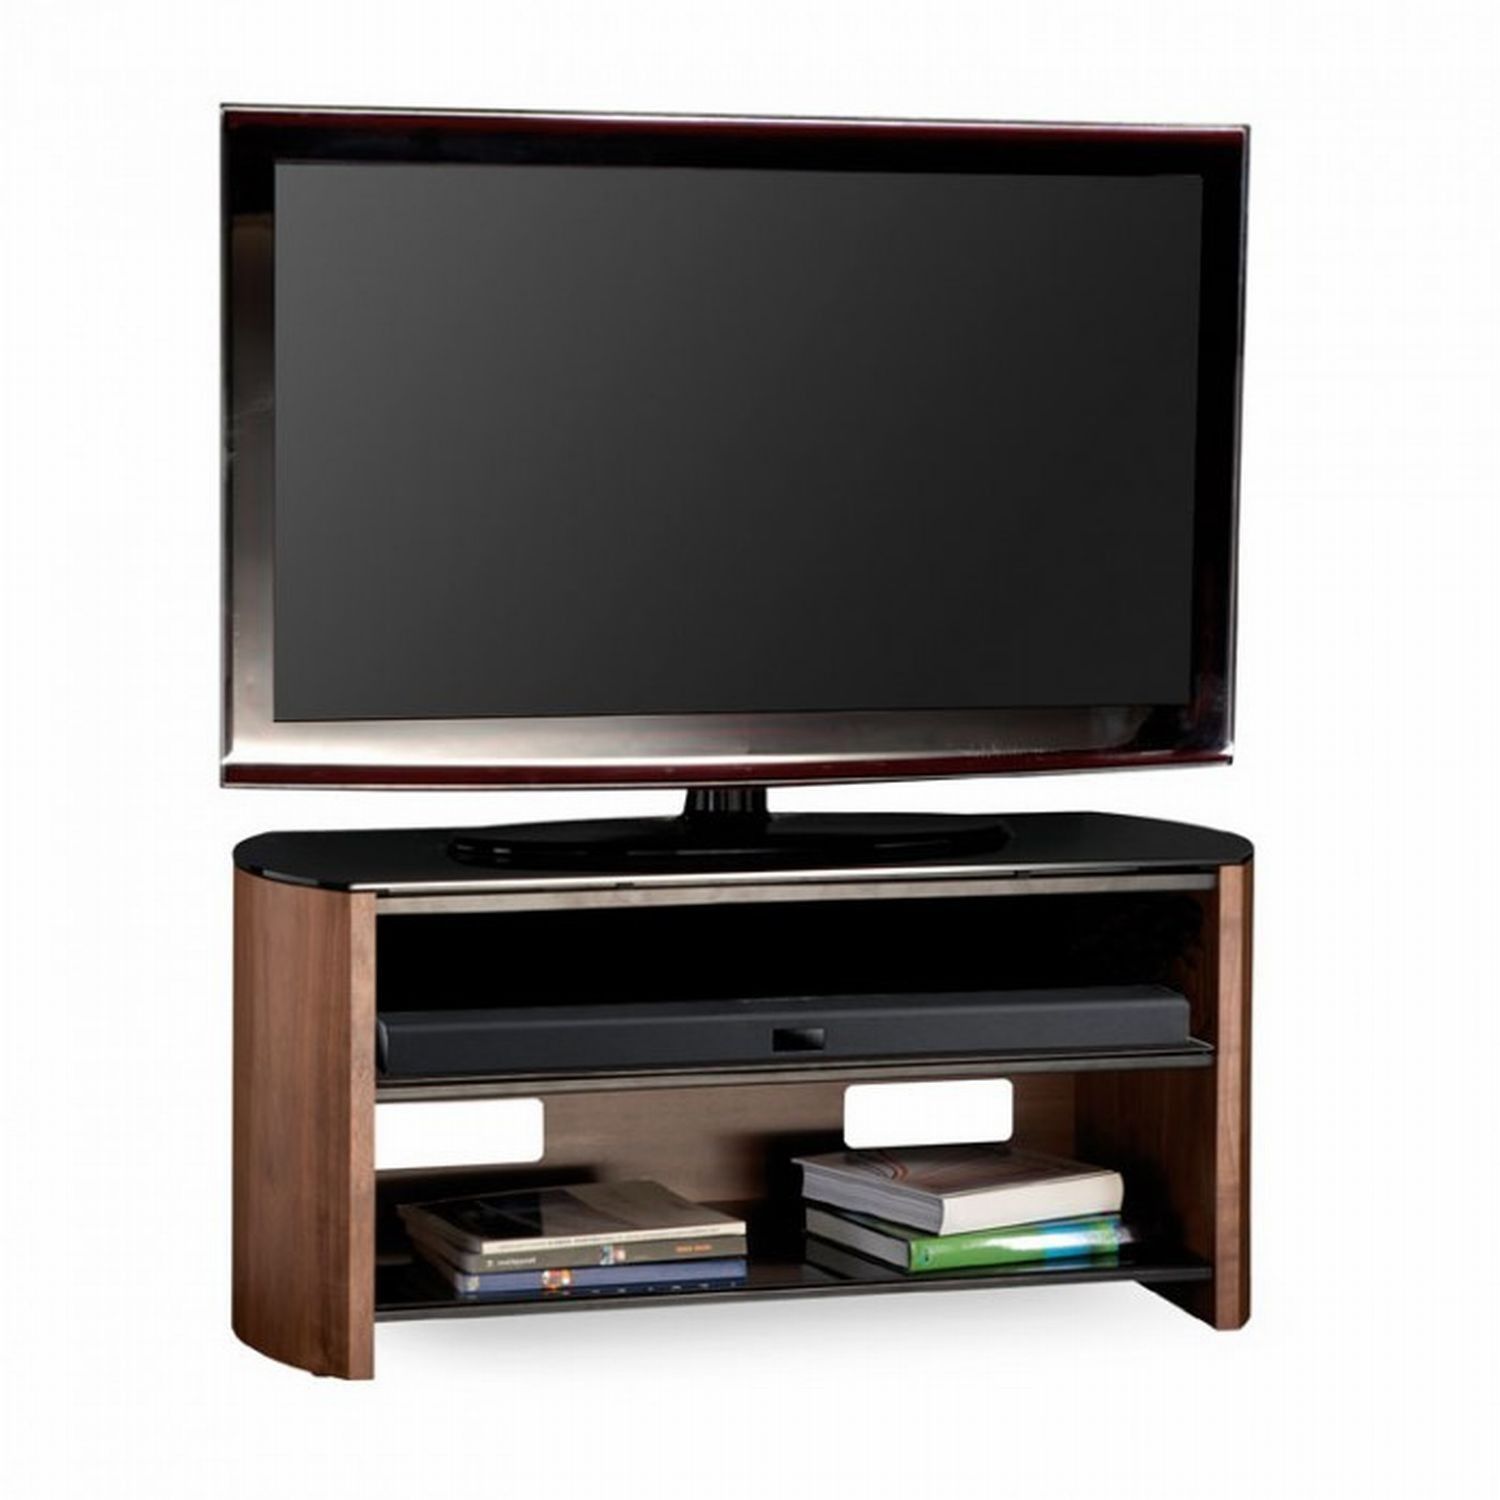 Casa Finewood Walnut Tv Stand 1100 | Leekes Intended For Walnut Tv Cabinet (View 3 of 15)